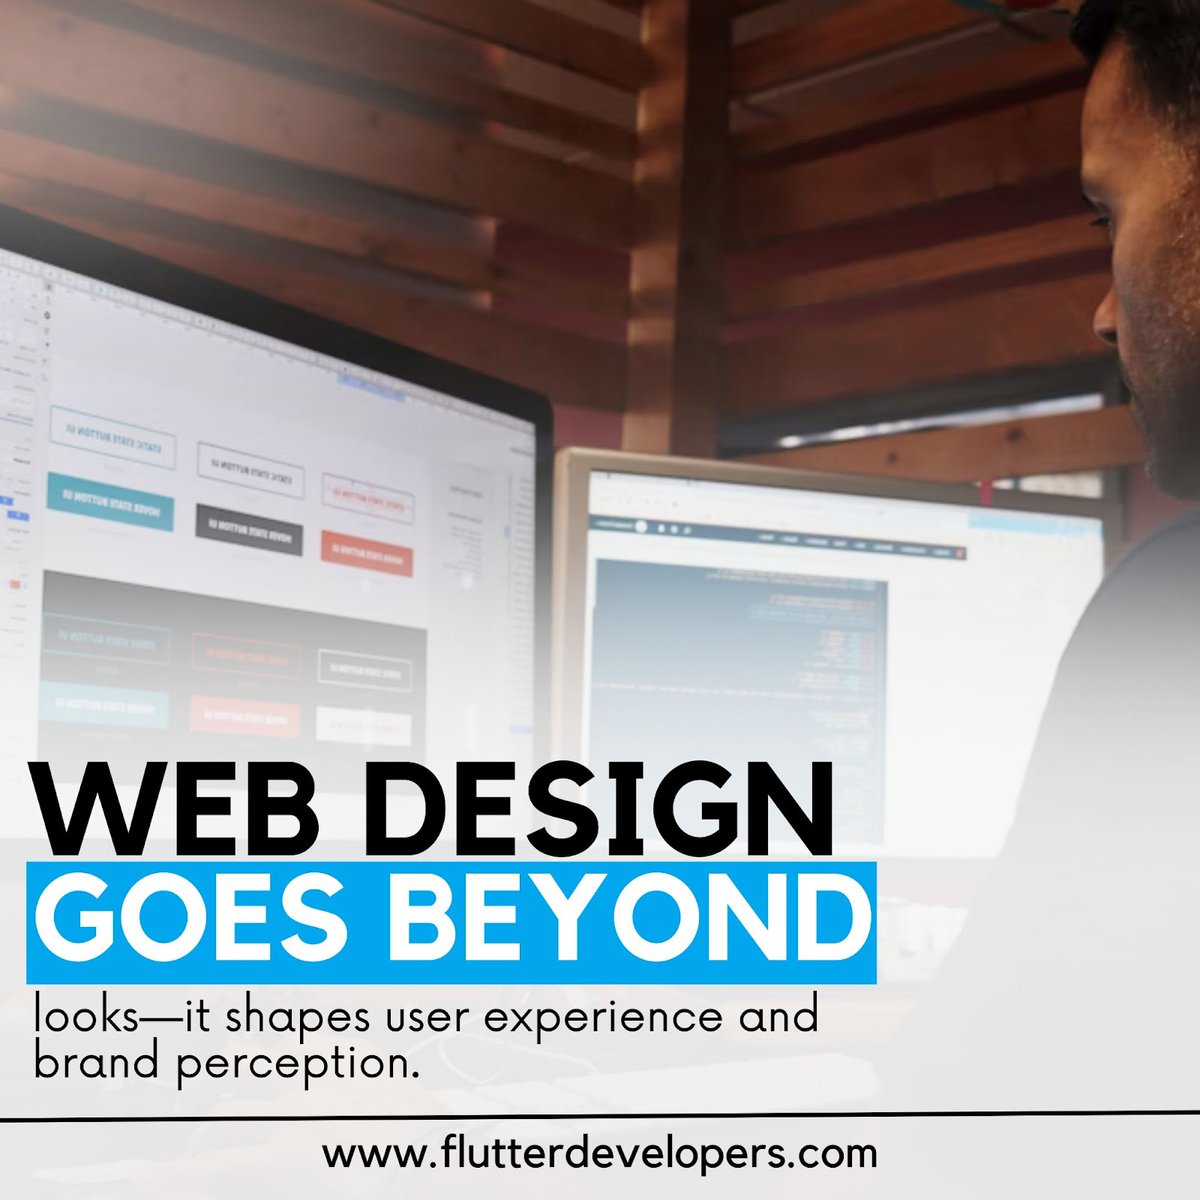 Web design isn't just about aesthetics; it's about creating an intuitive user experience that guides visitors seamlessly through your digital space. At Flutter Developers.
------
🌐 flutterdevelopers.com 
.
#Flutter #flutterdevelopers #appdevelopment #digitalmagic